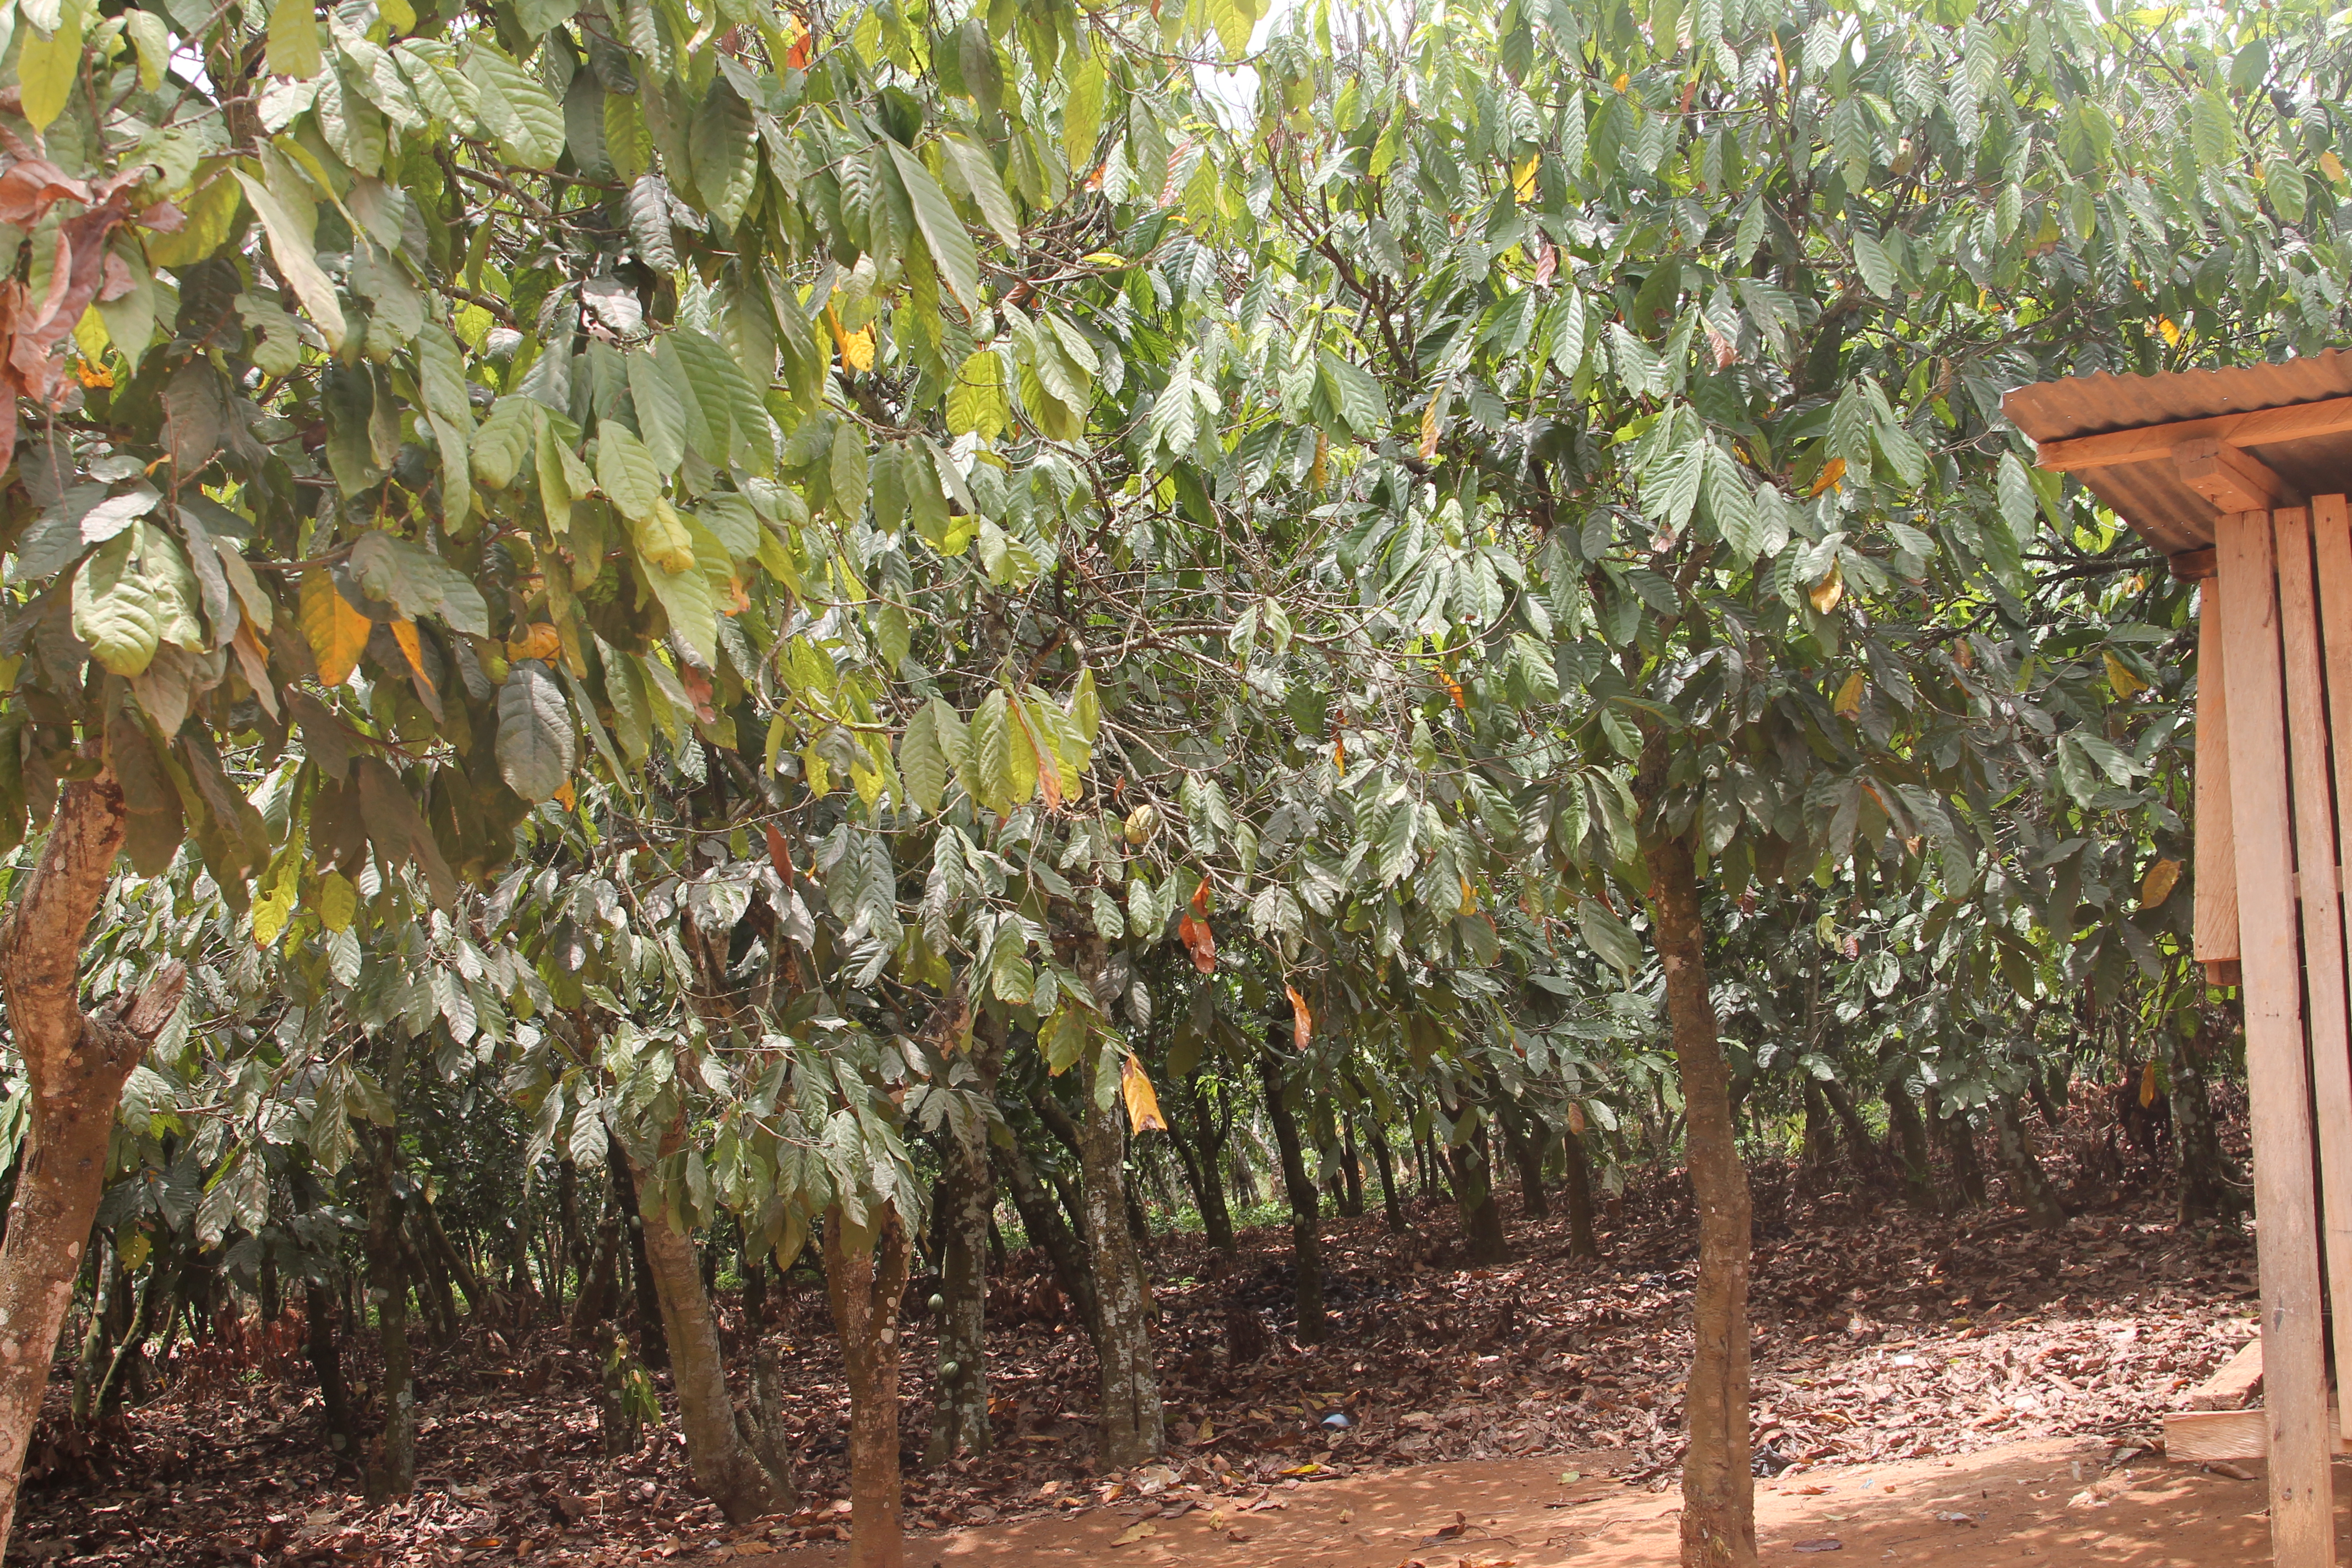 40% of cocoa trees to be cut, no bonuses for farmers